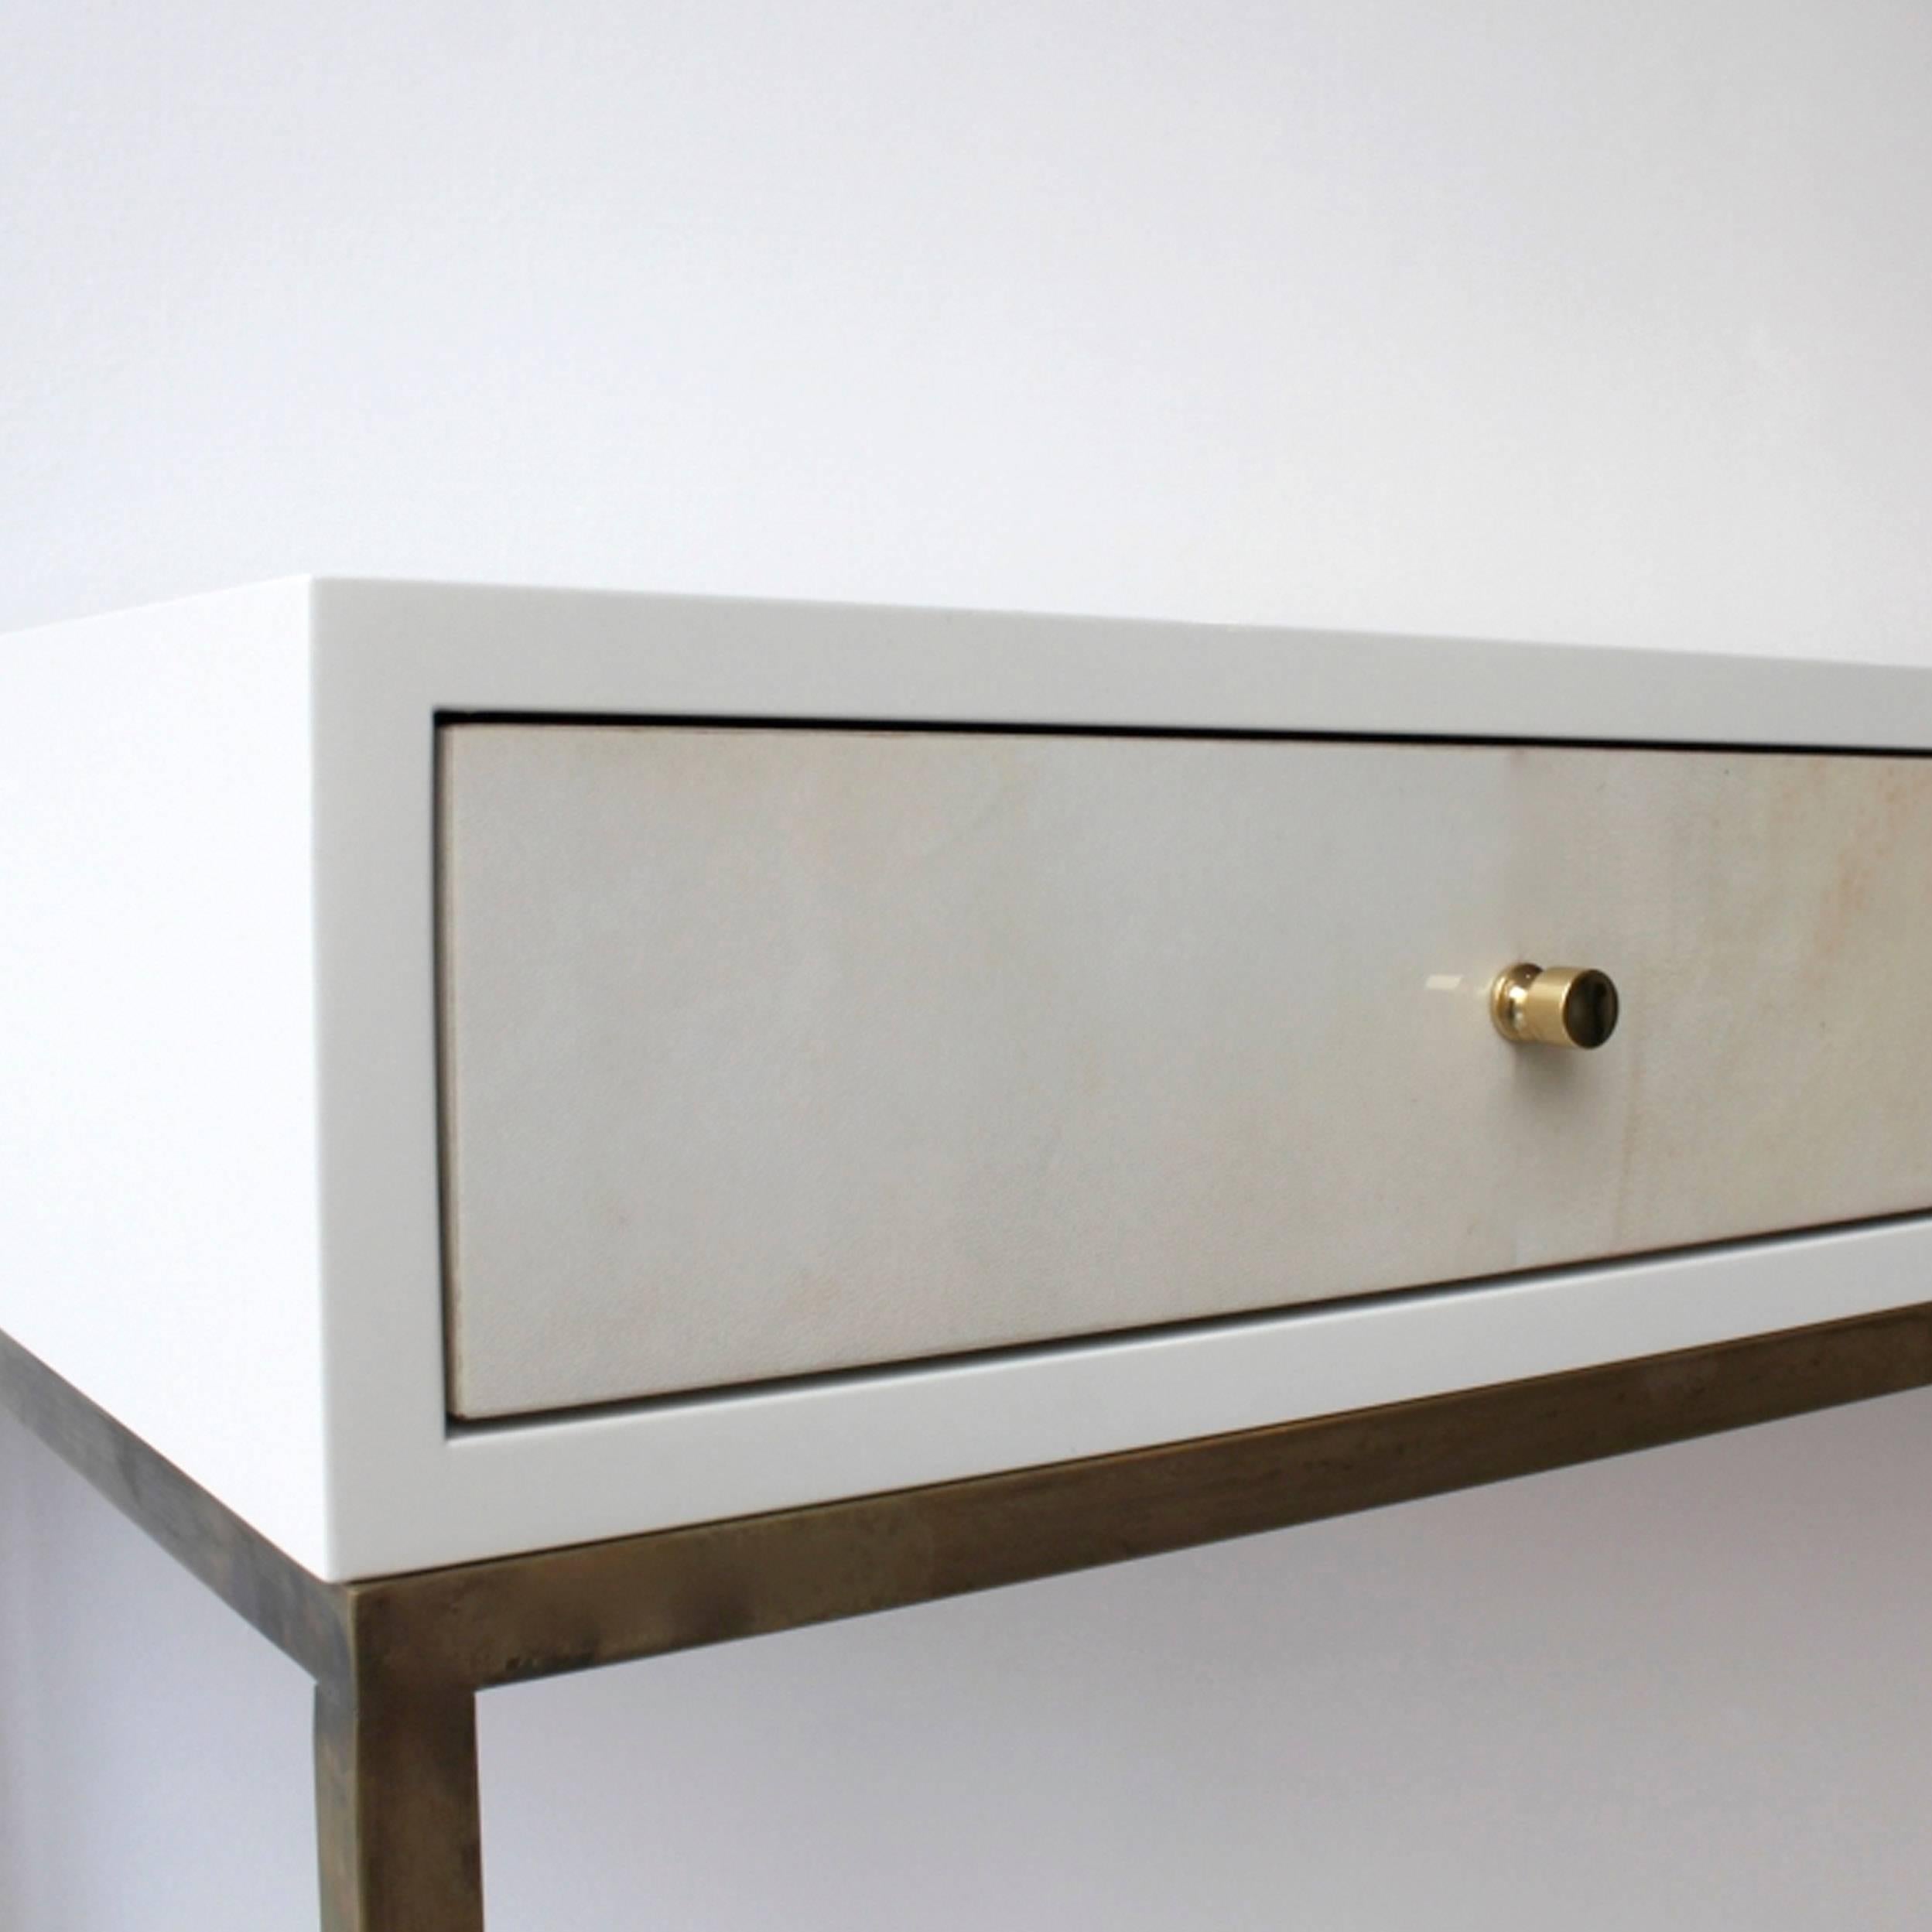 White (RAL 9001) piano lacquered desk with brass lined drawers, antique brass frame base, vellum parchment front drawer detail and brass pull knobs. Also available in black (RAL 9004) piano lacquered colour finish outer frame. Bespoke dimensions and